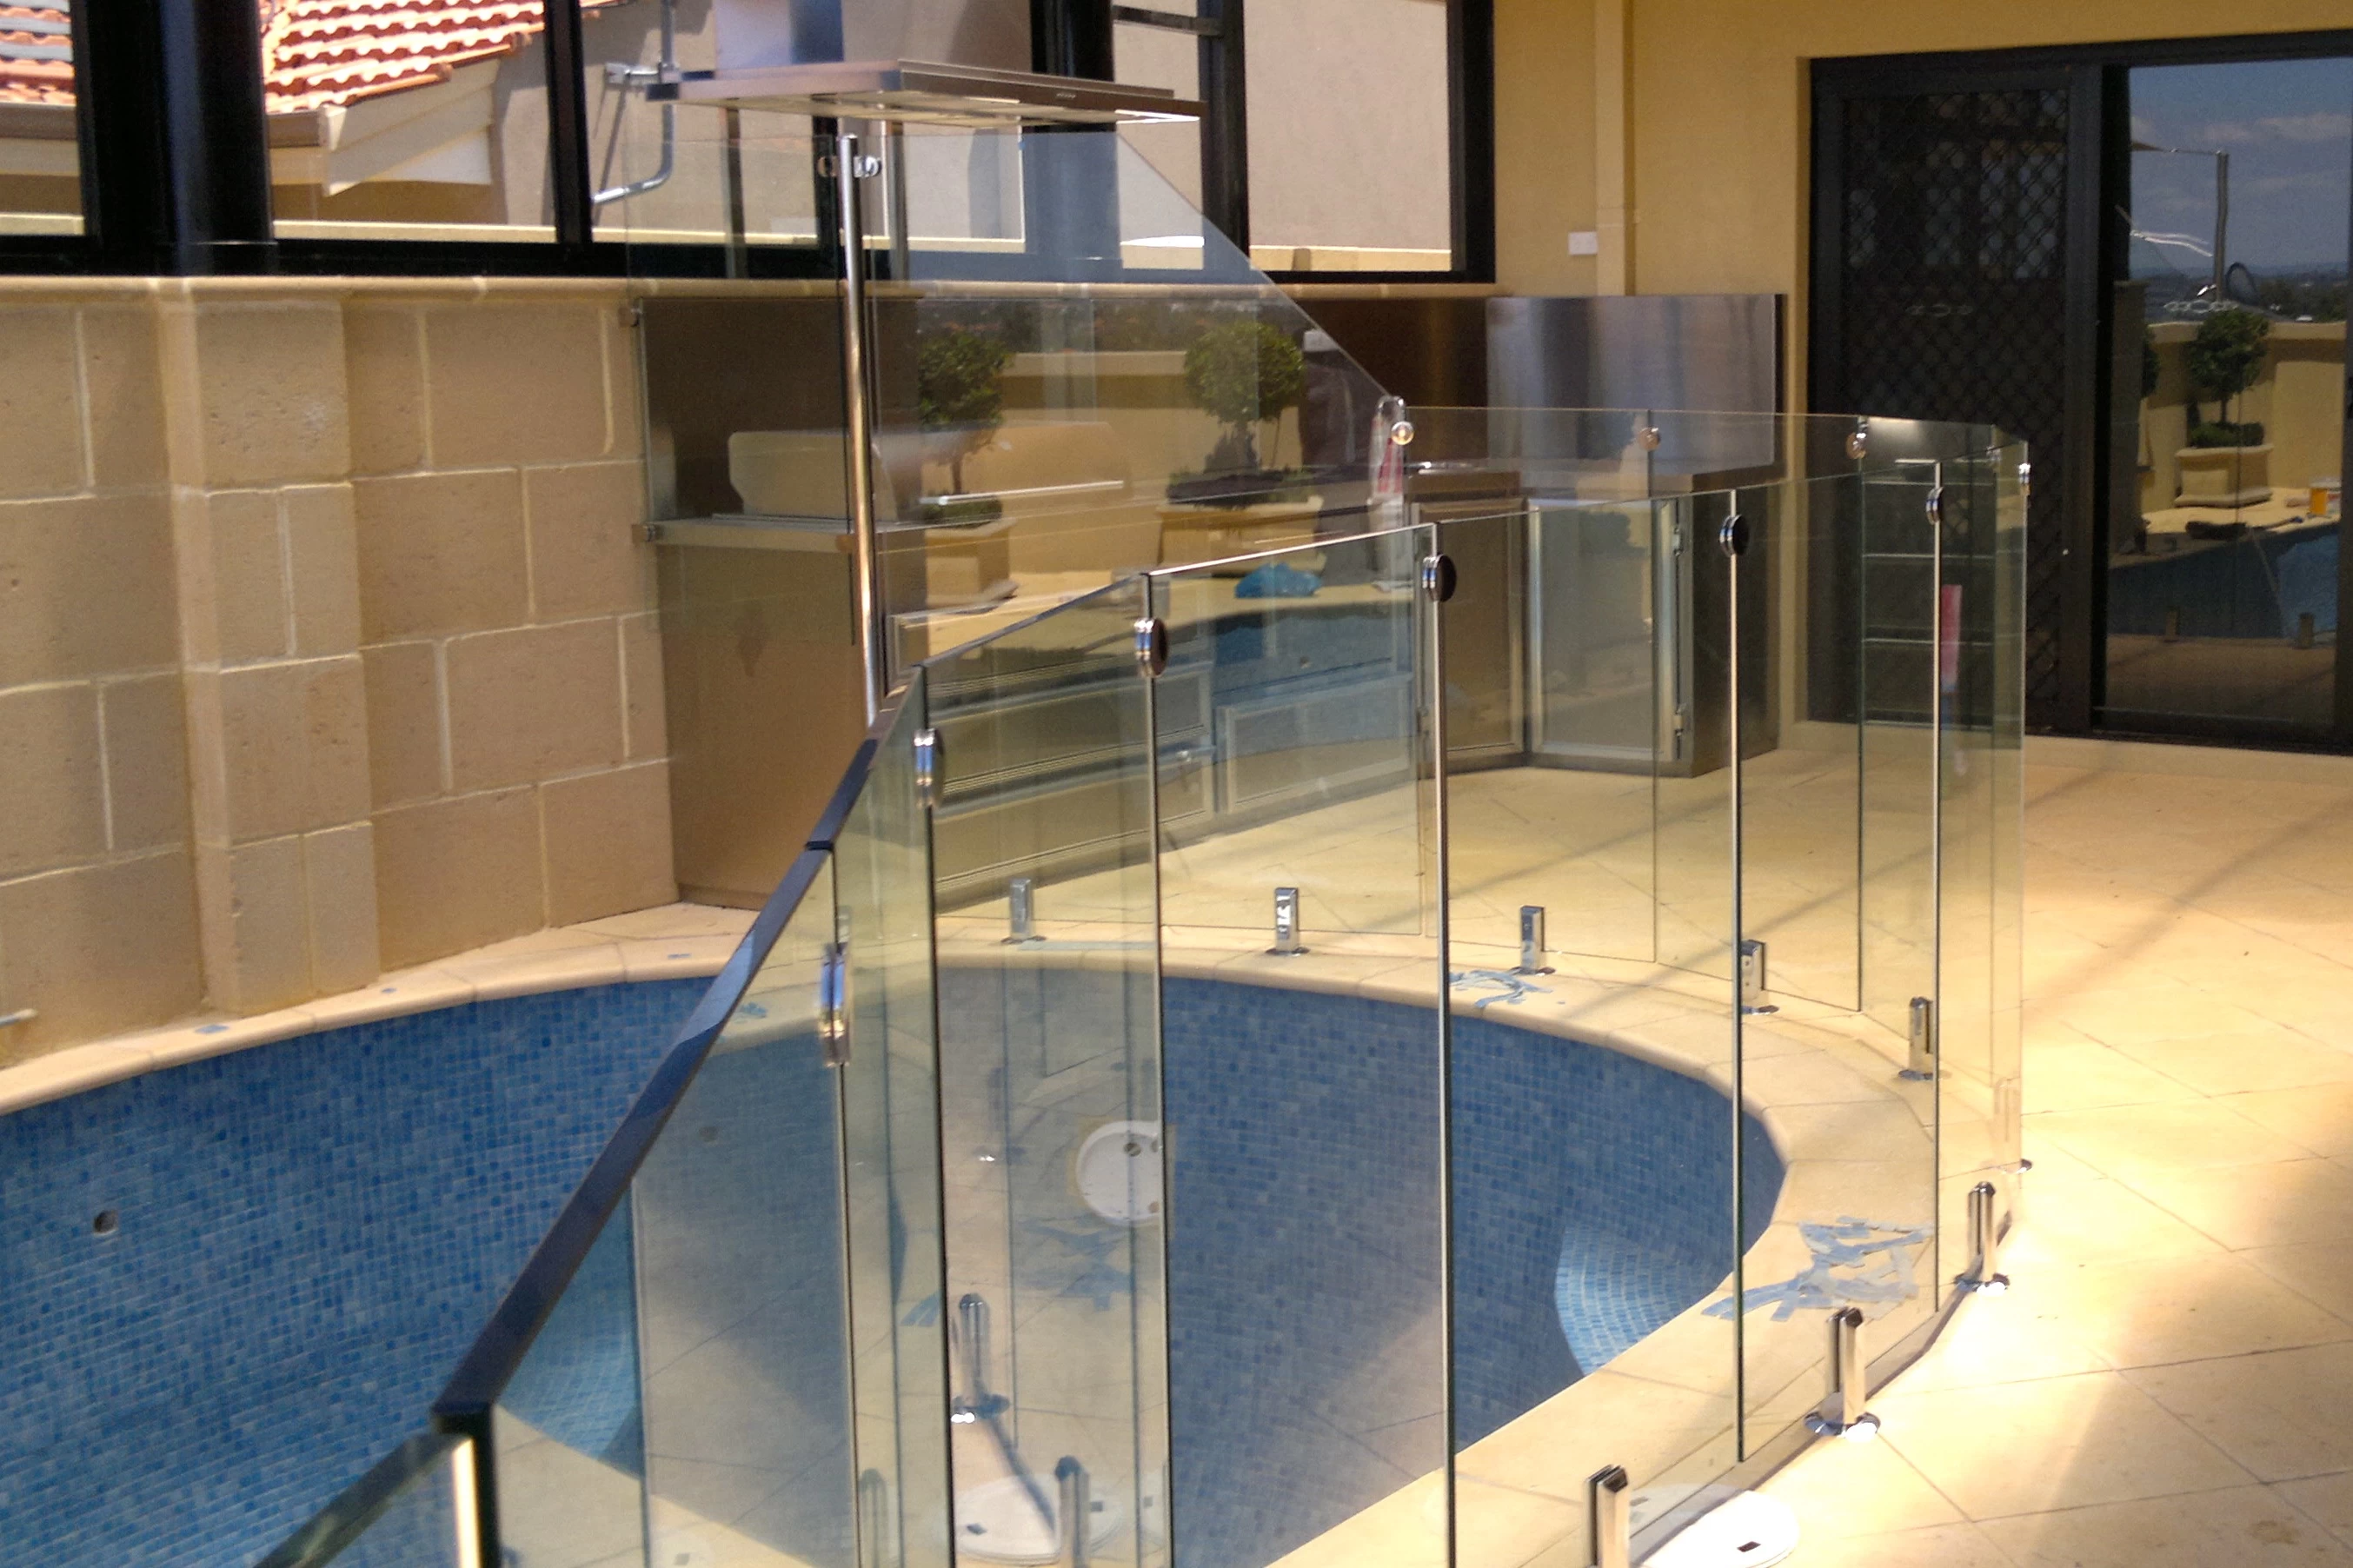 Glass railing hardware stainless steel balustrade design collection